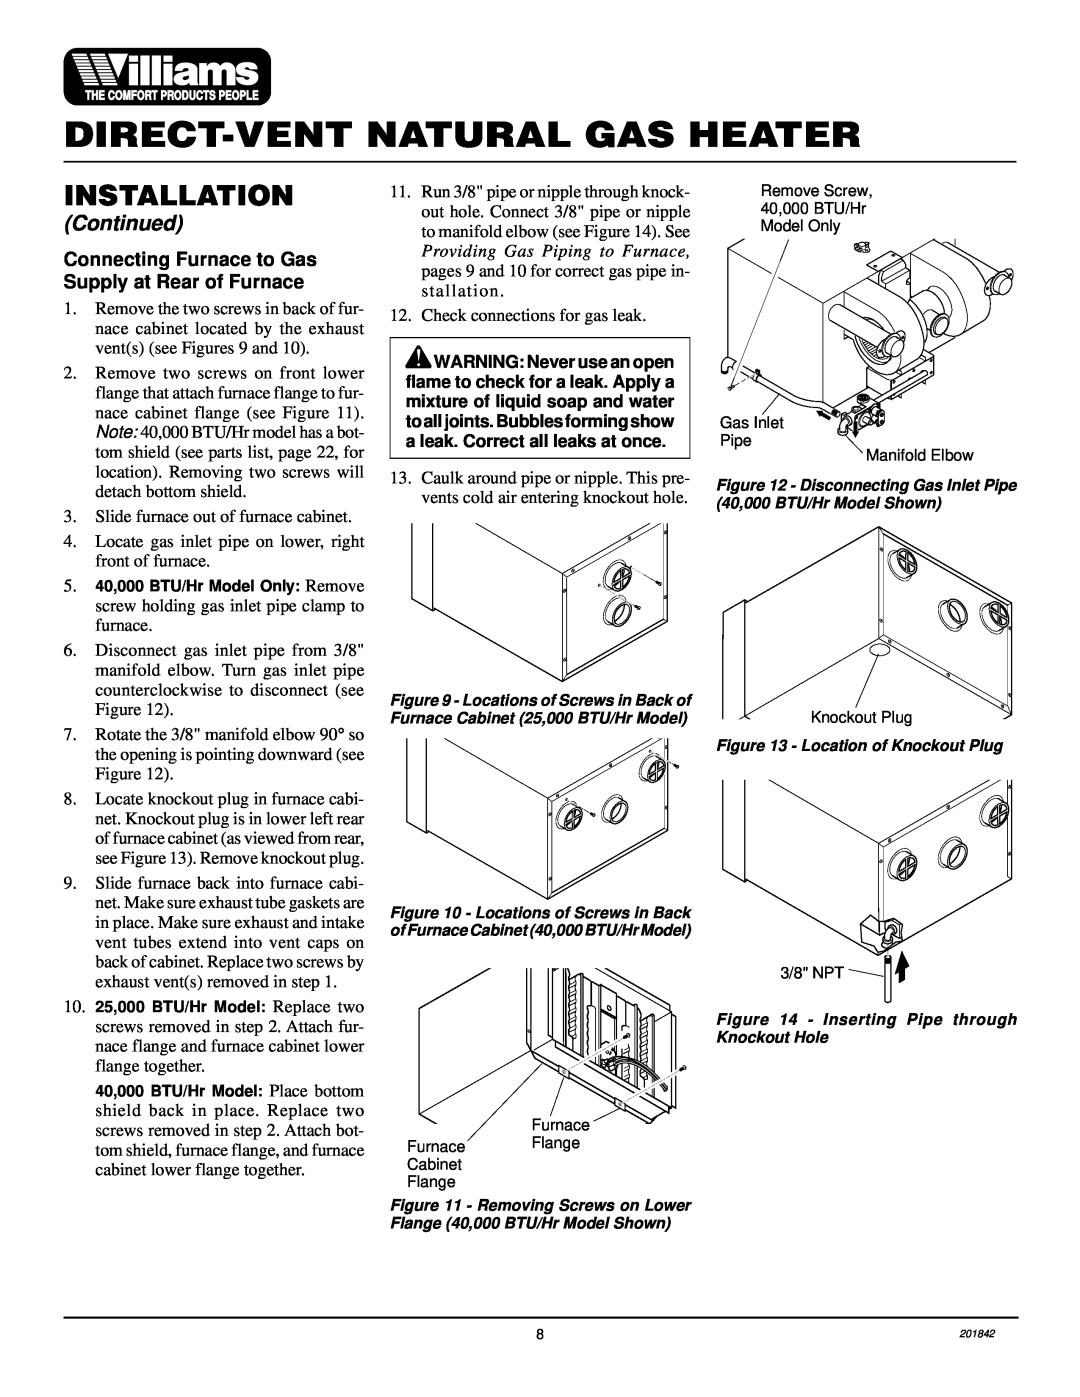 Williams 2503532, 4003532 Direct-Ventnatural Gas Heater, Installation, Continued, Slide furnace out of furnace cabinet 